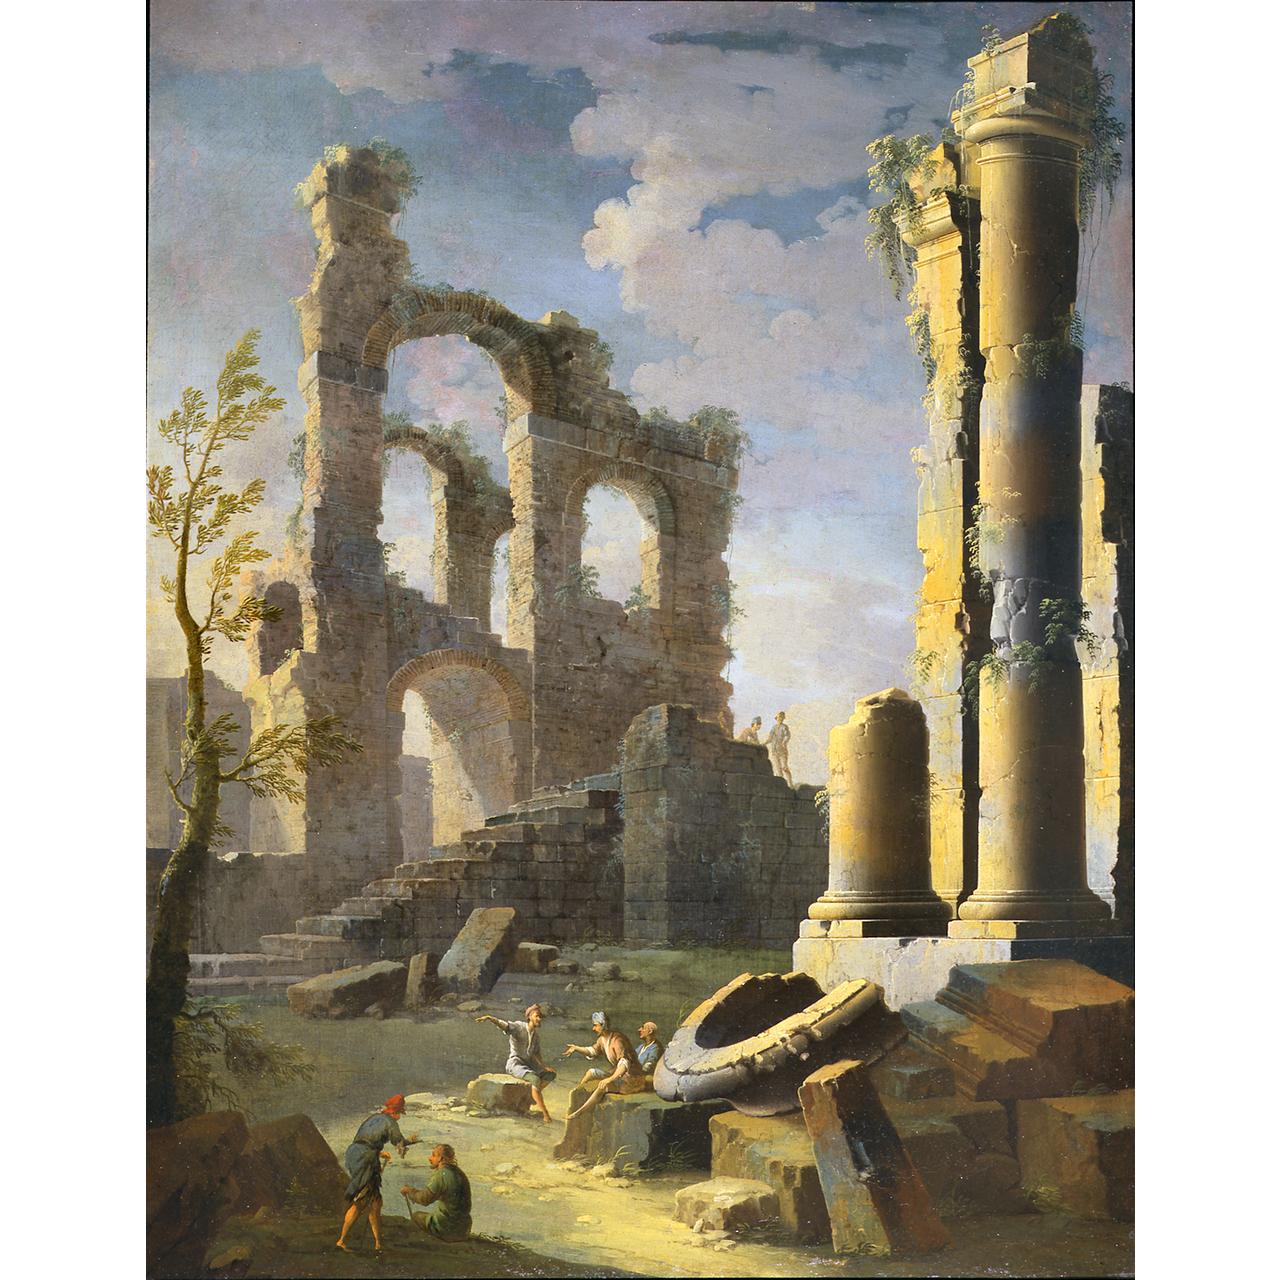 Dipinto: Capriccio with ancient ruins and figure, dusk (I)